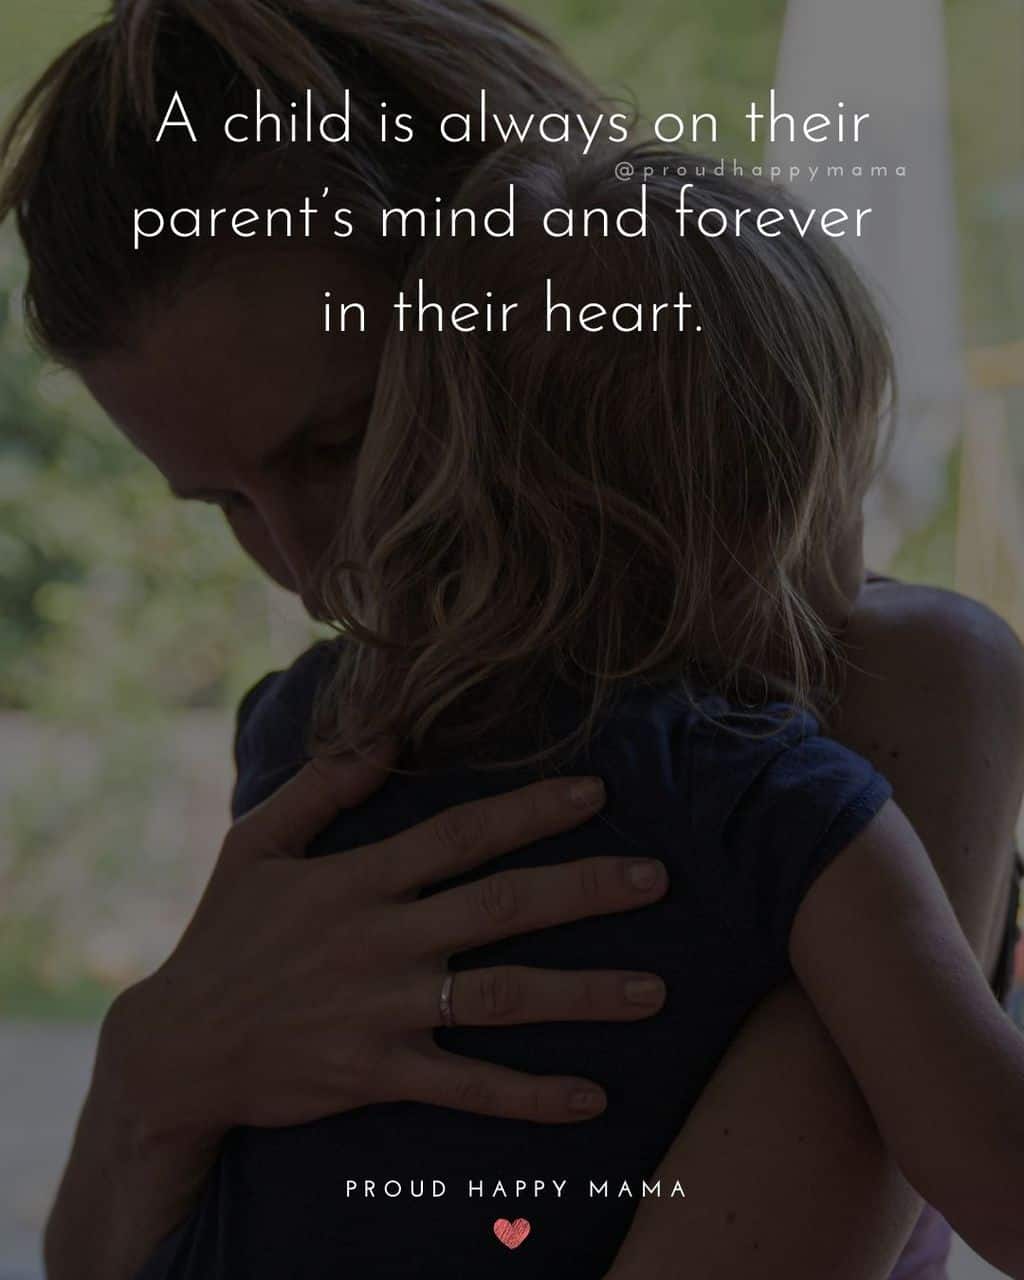 Parenting Quotes - A child is always on their parent’s mind and forever in their heart.’